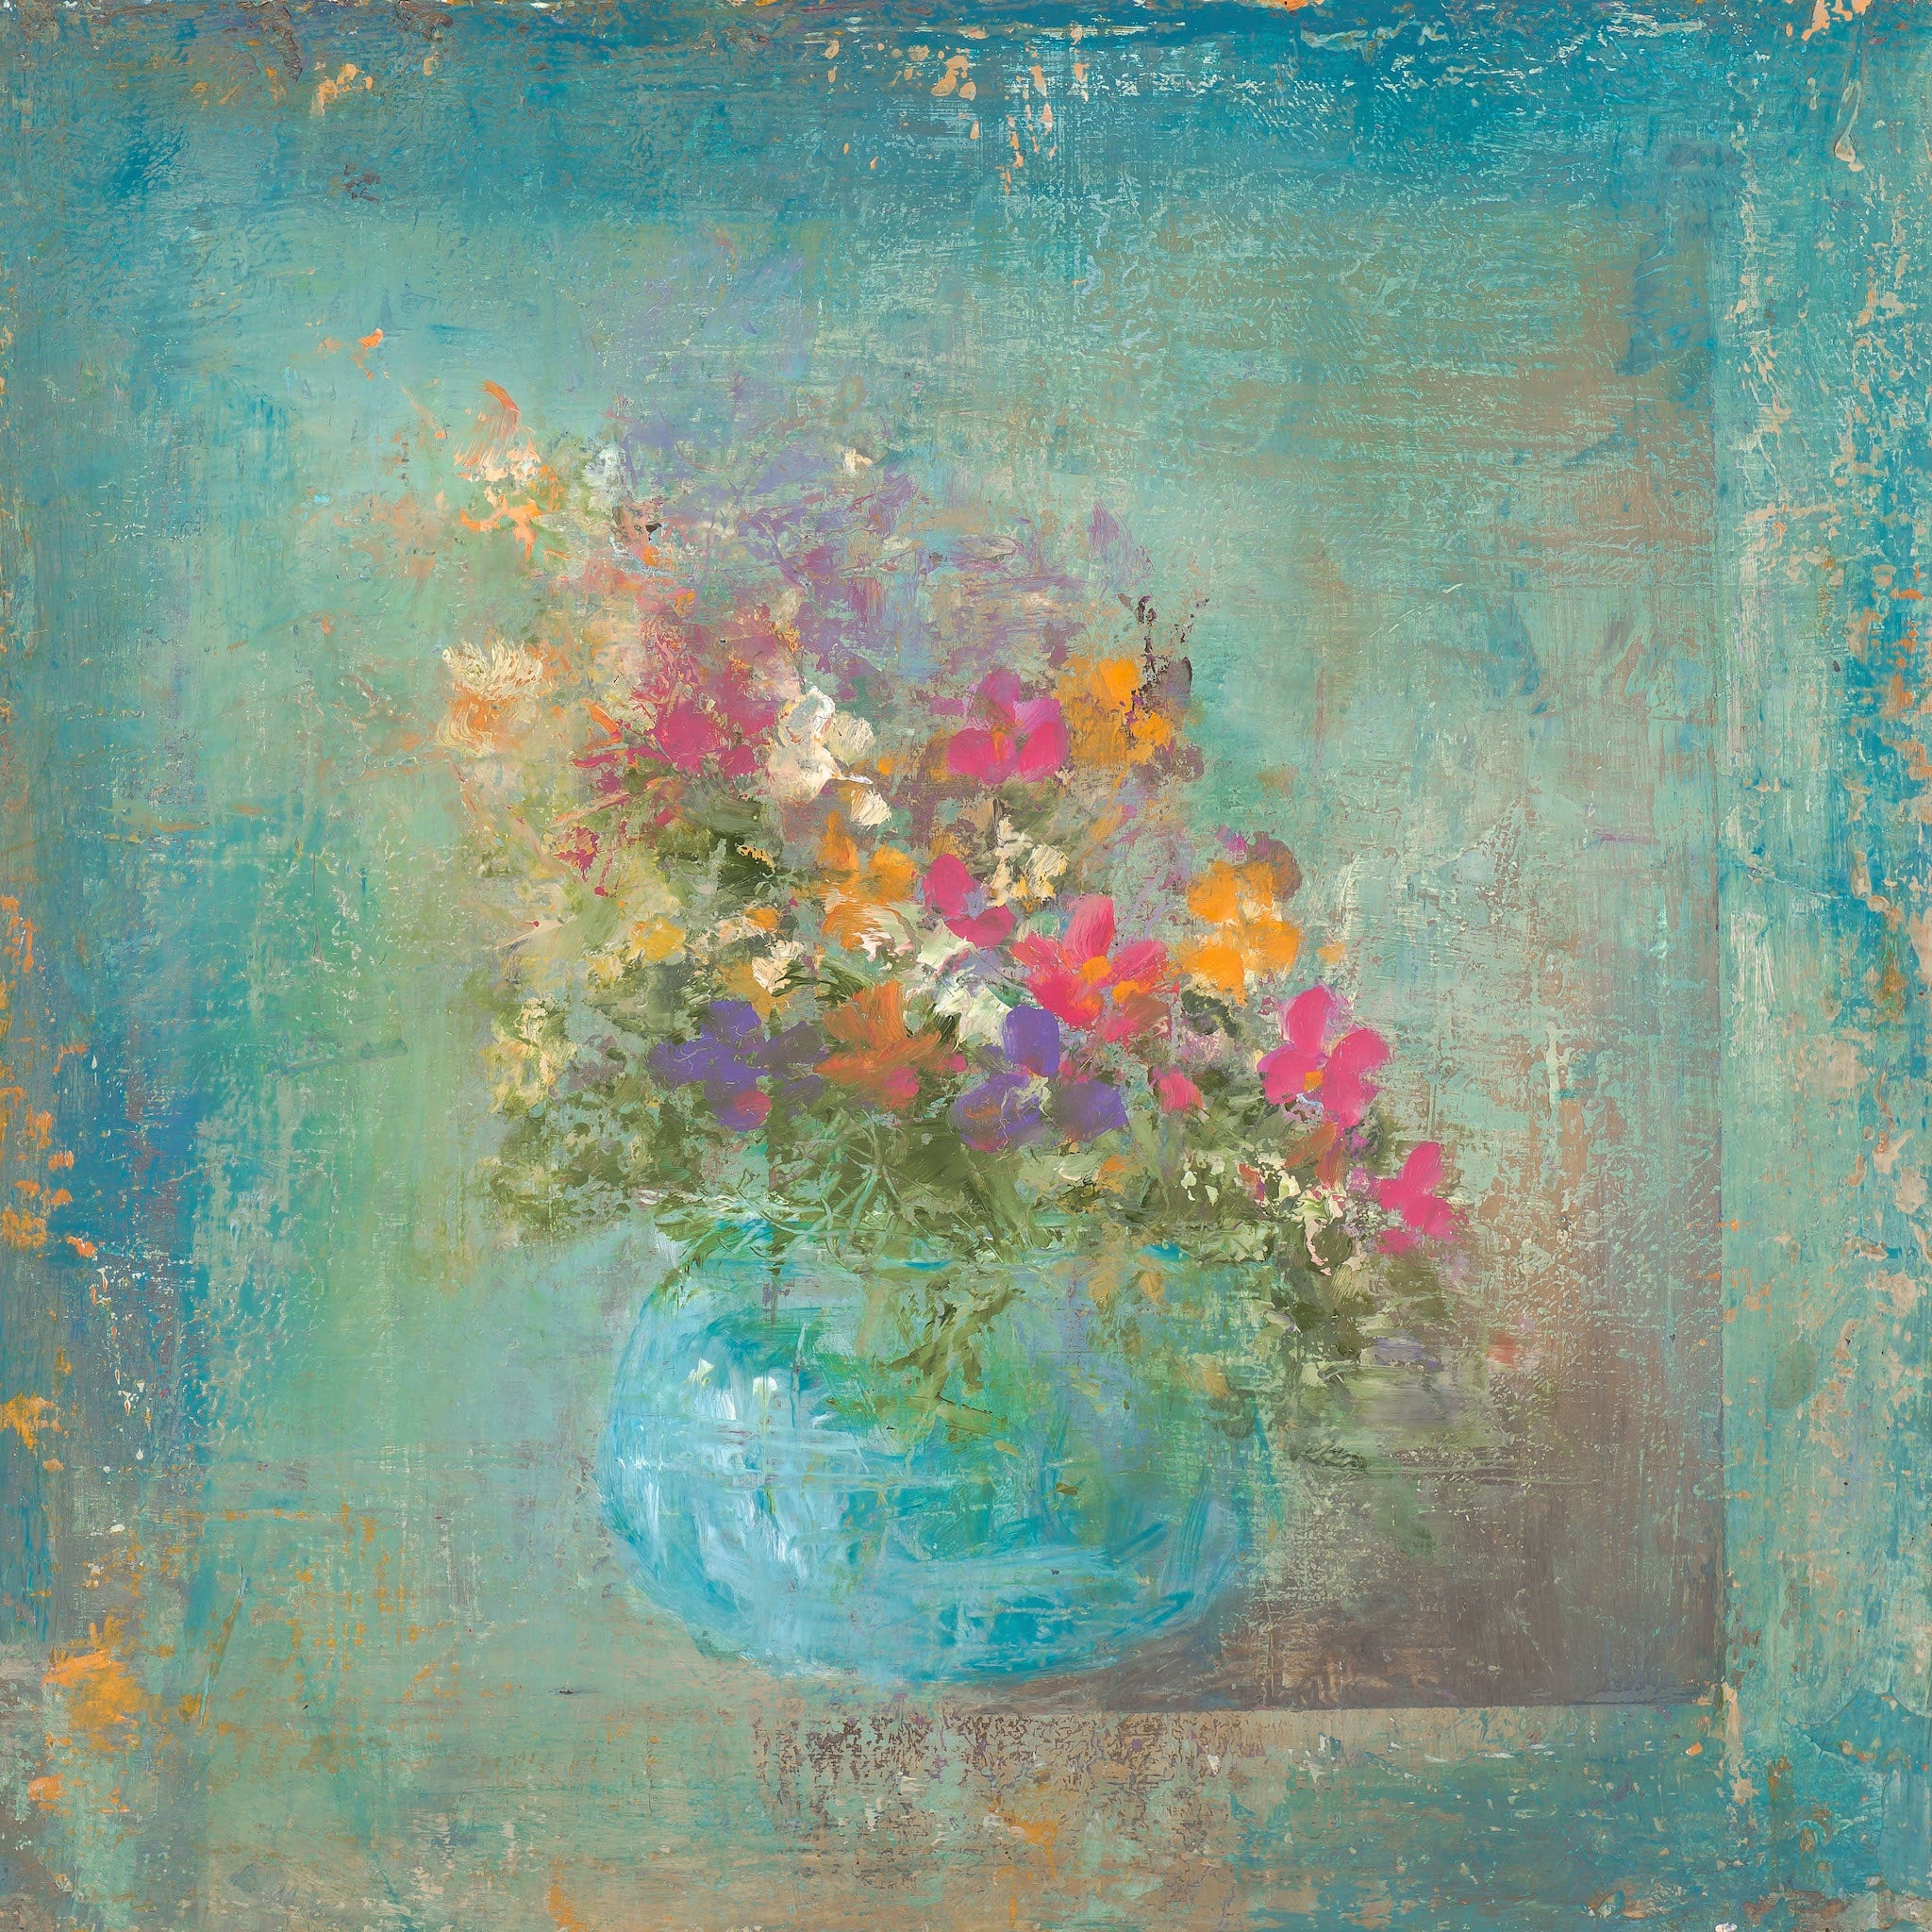 Still life oil painting of flowers in a vase by artist Amanda Hoskin